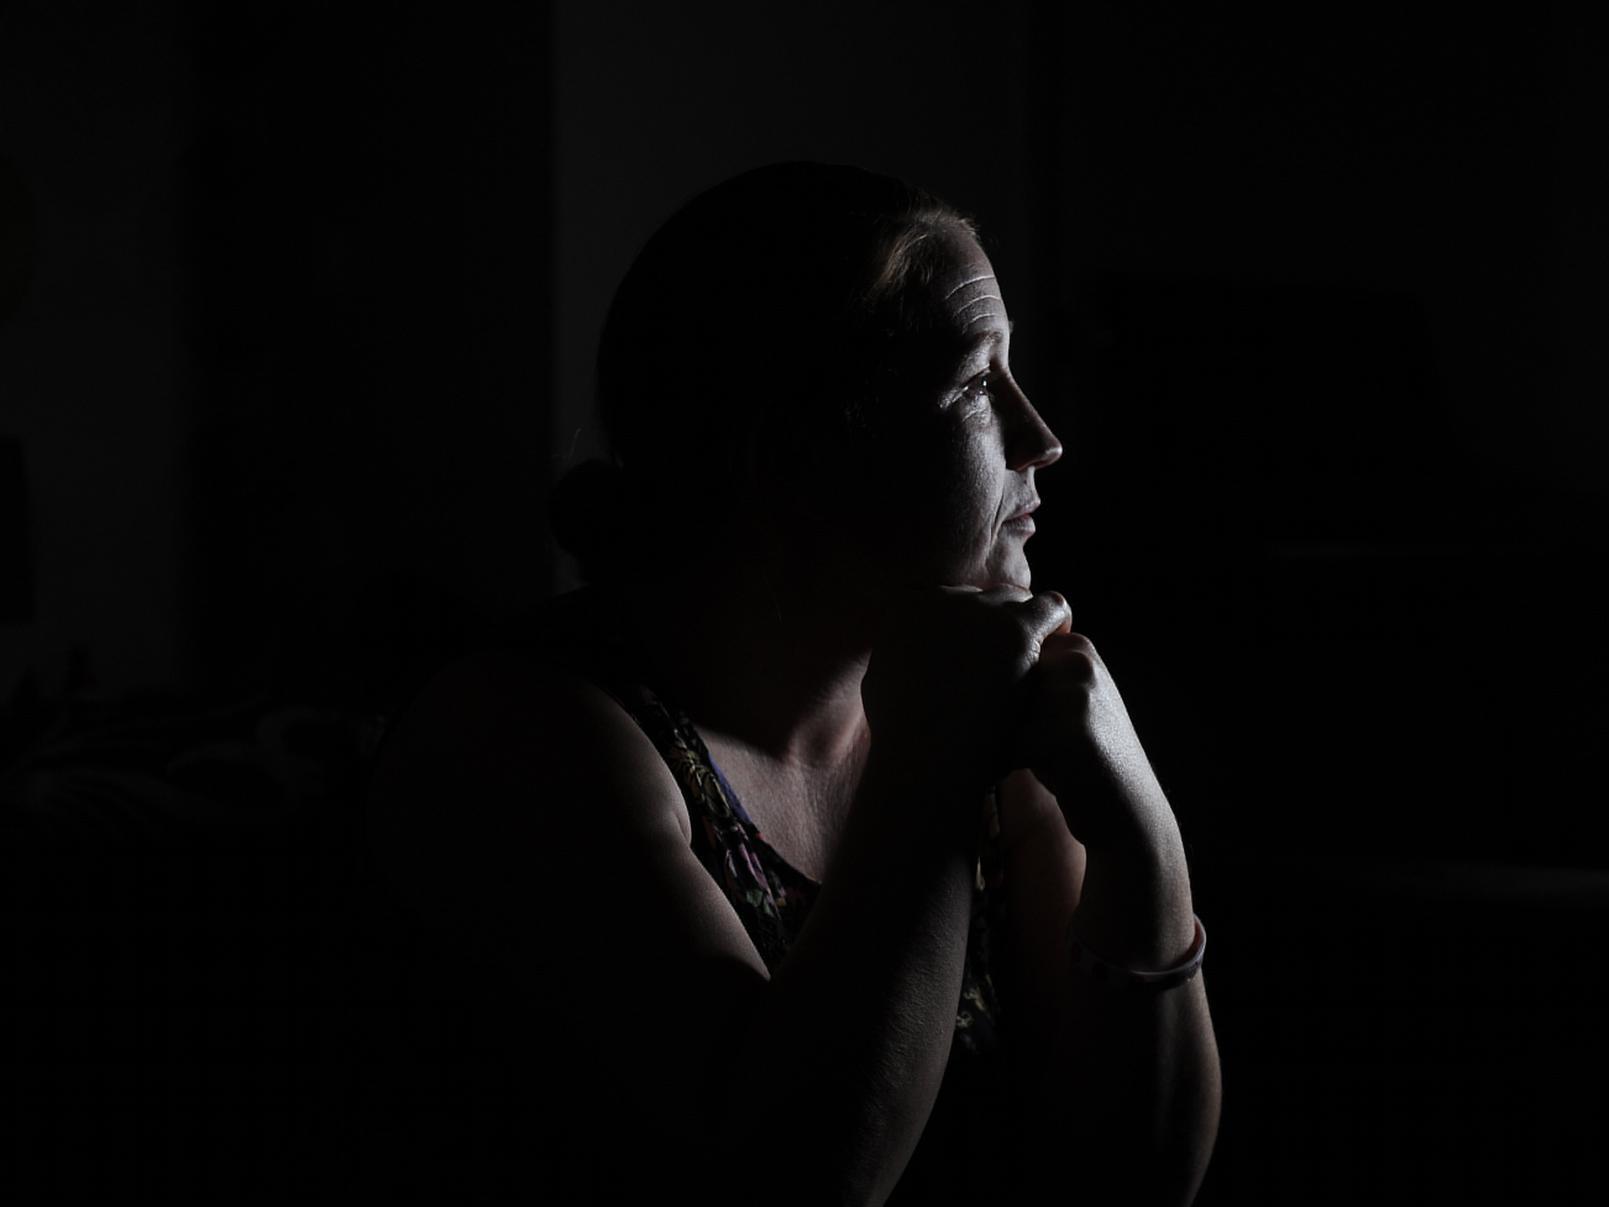 Claire Ashwell, pictured, was one of the rape victims the YEP spoke to as part of a series of features highlighting low prosecution rates